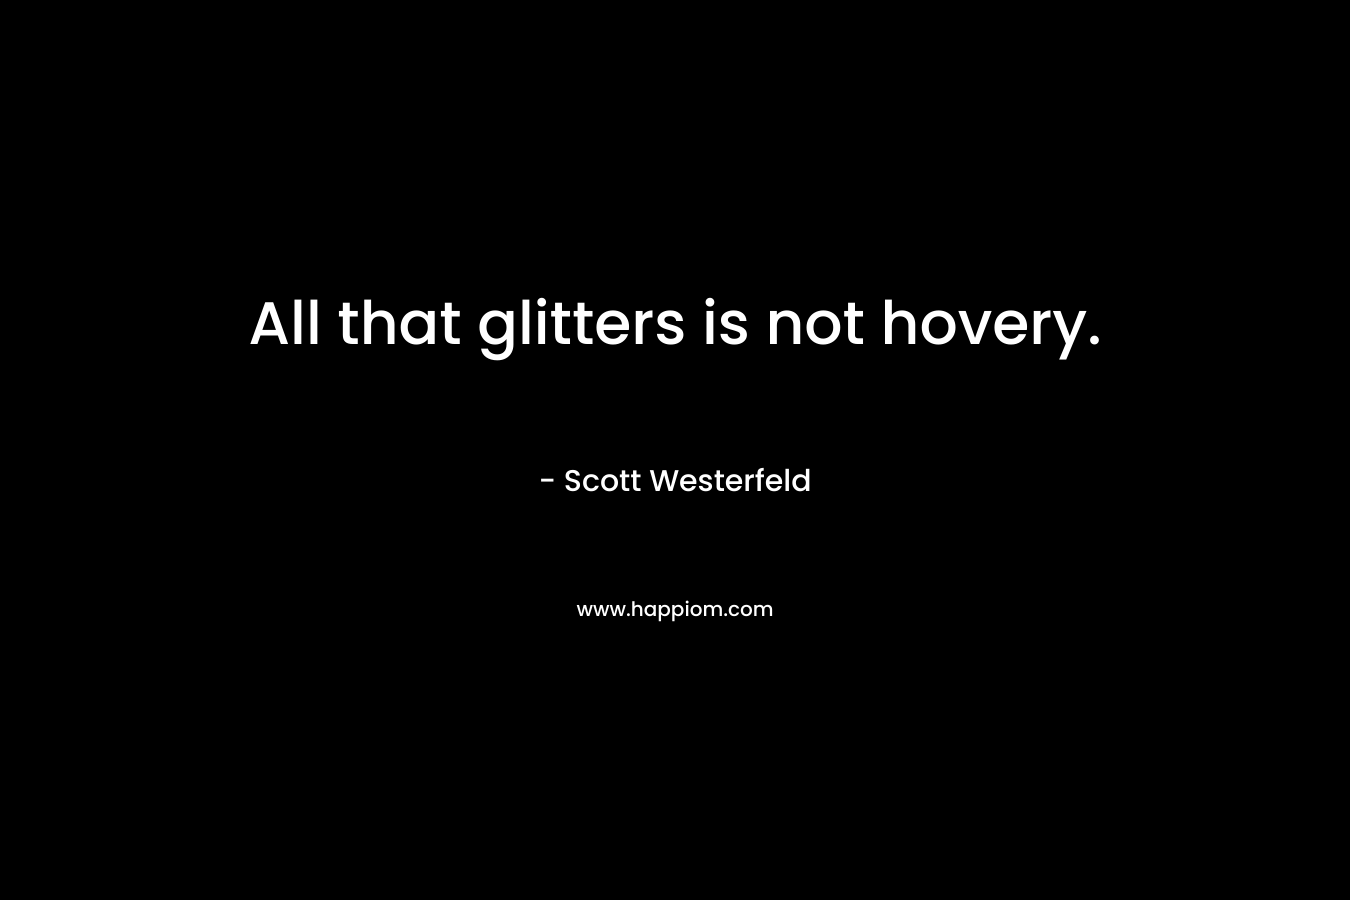 All that glitters is not hovery. – Scott Westerfeld